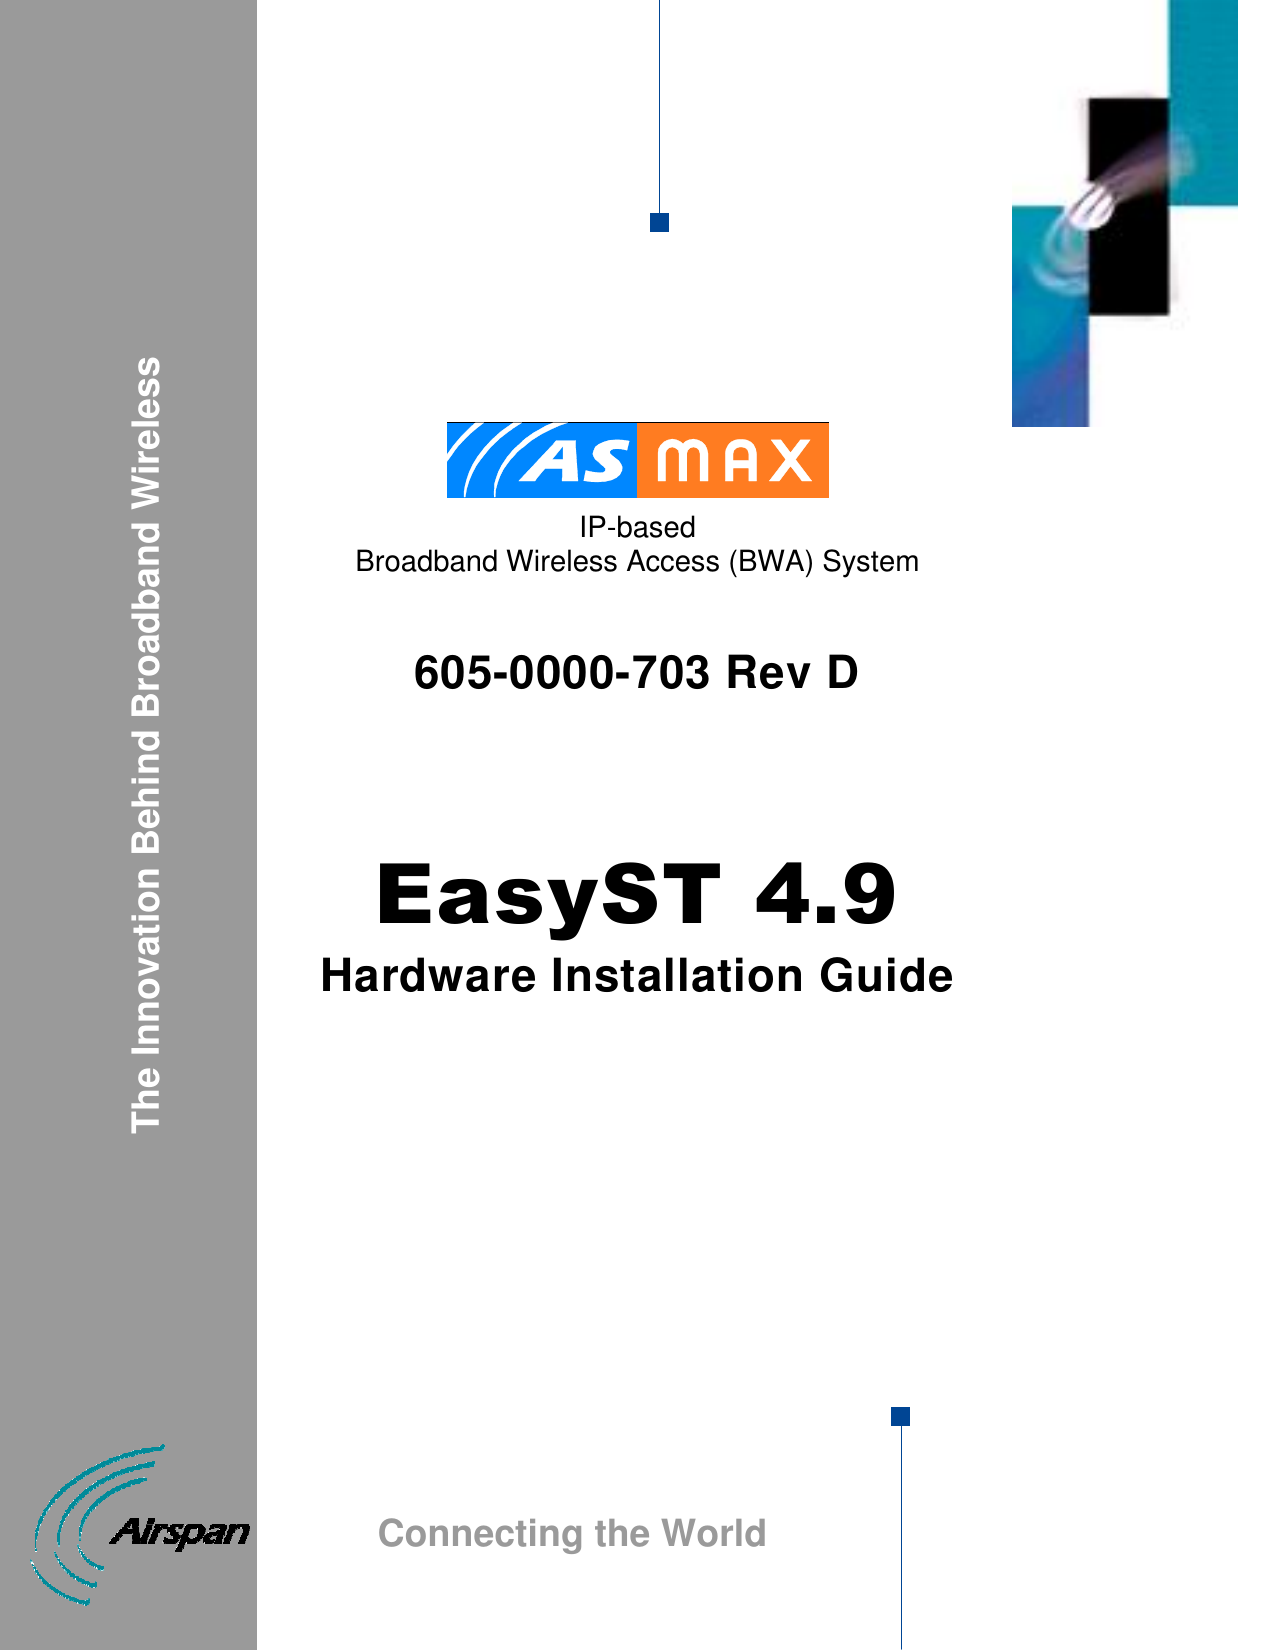            IP-based  Broadband Wireless Access (BWA) System   605-0000-703 Rev D    EasyST 4.9 Hardware Installation Guide                                      The Innovation Behind Broadband Wireless Connecting the World 